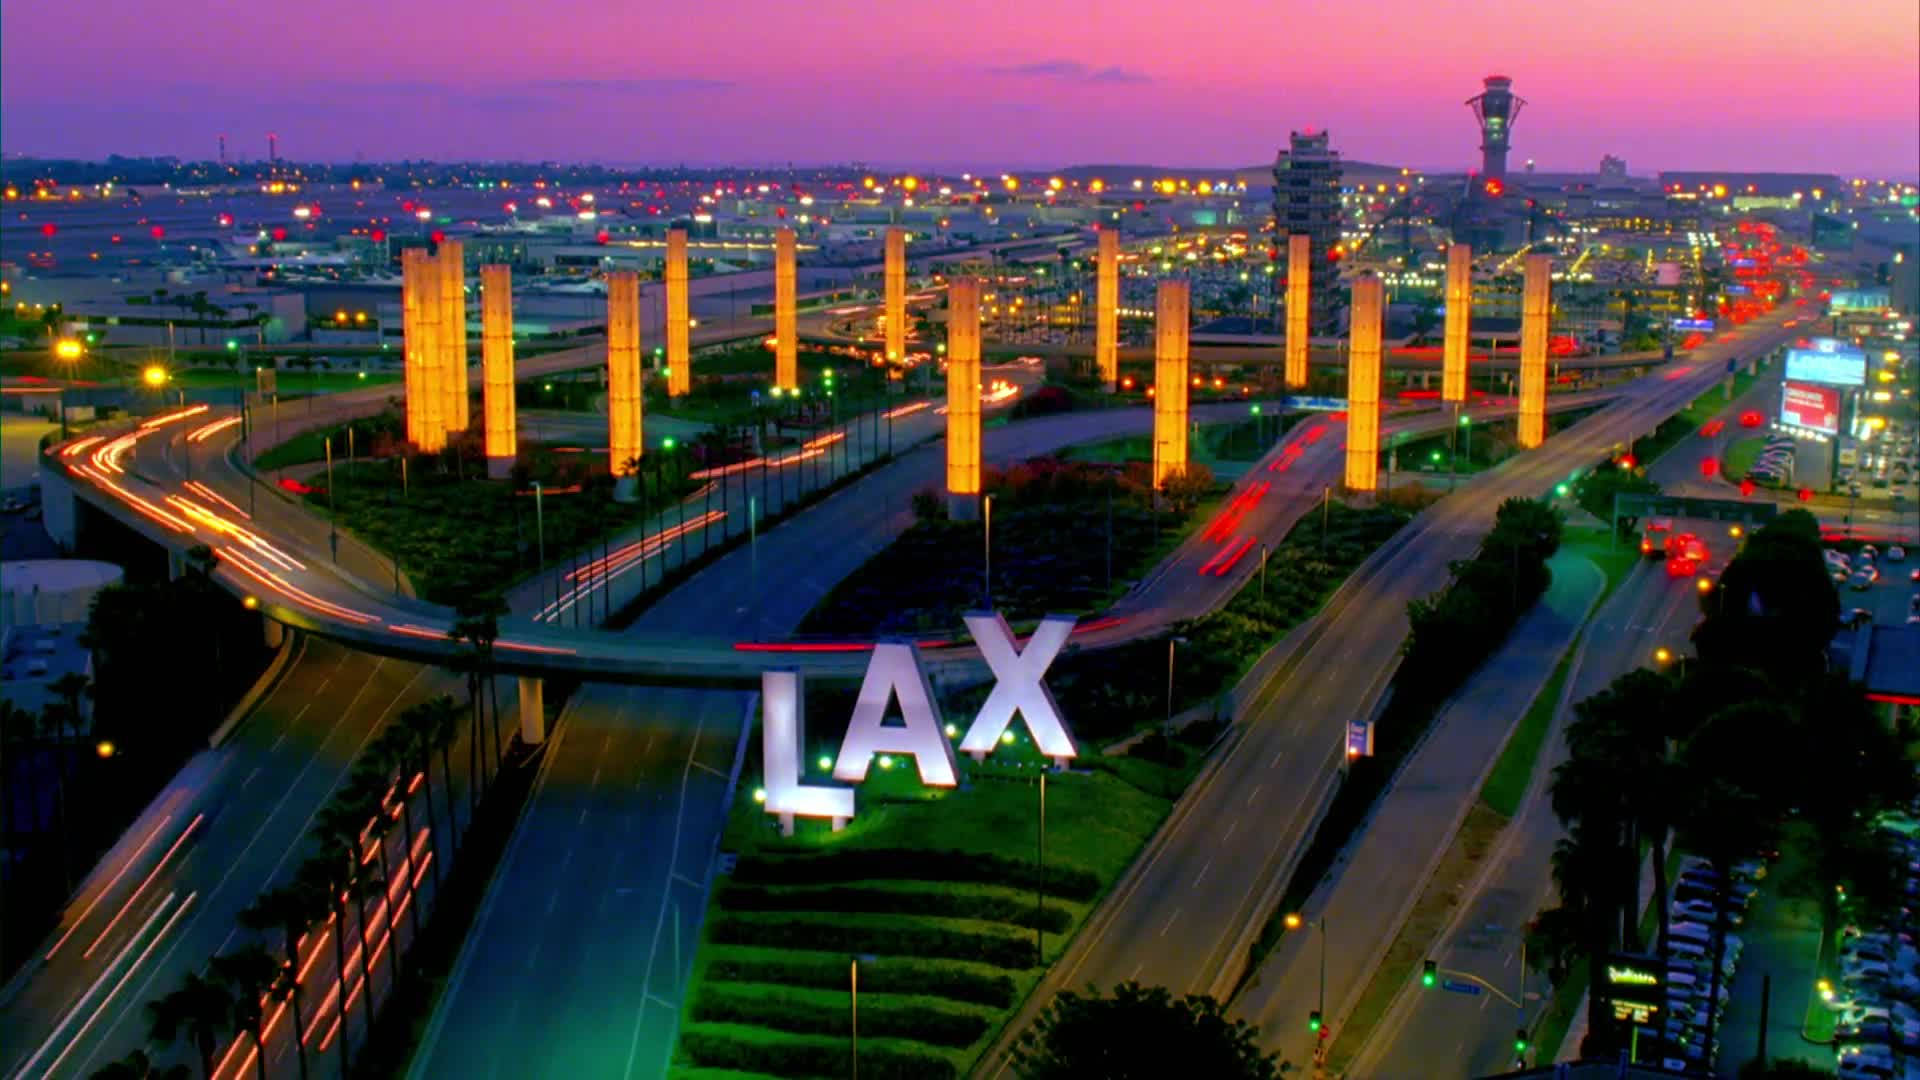 The Pacific Ocean skyline at the Los Angeles International Airport. Wallpaper